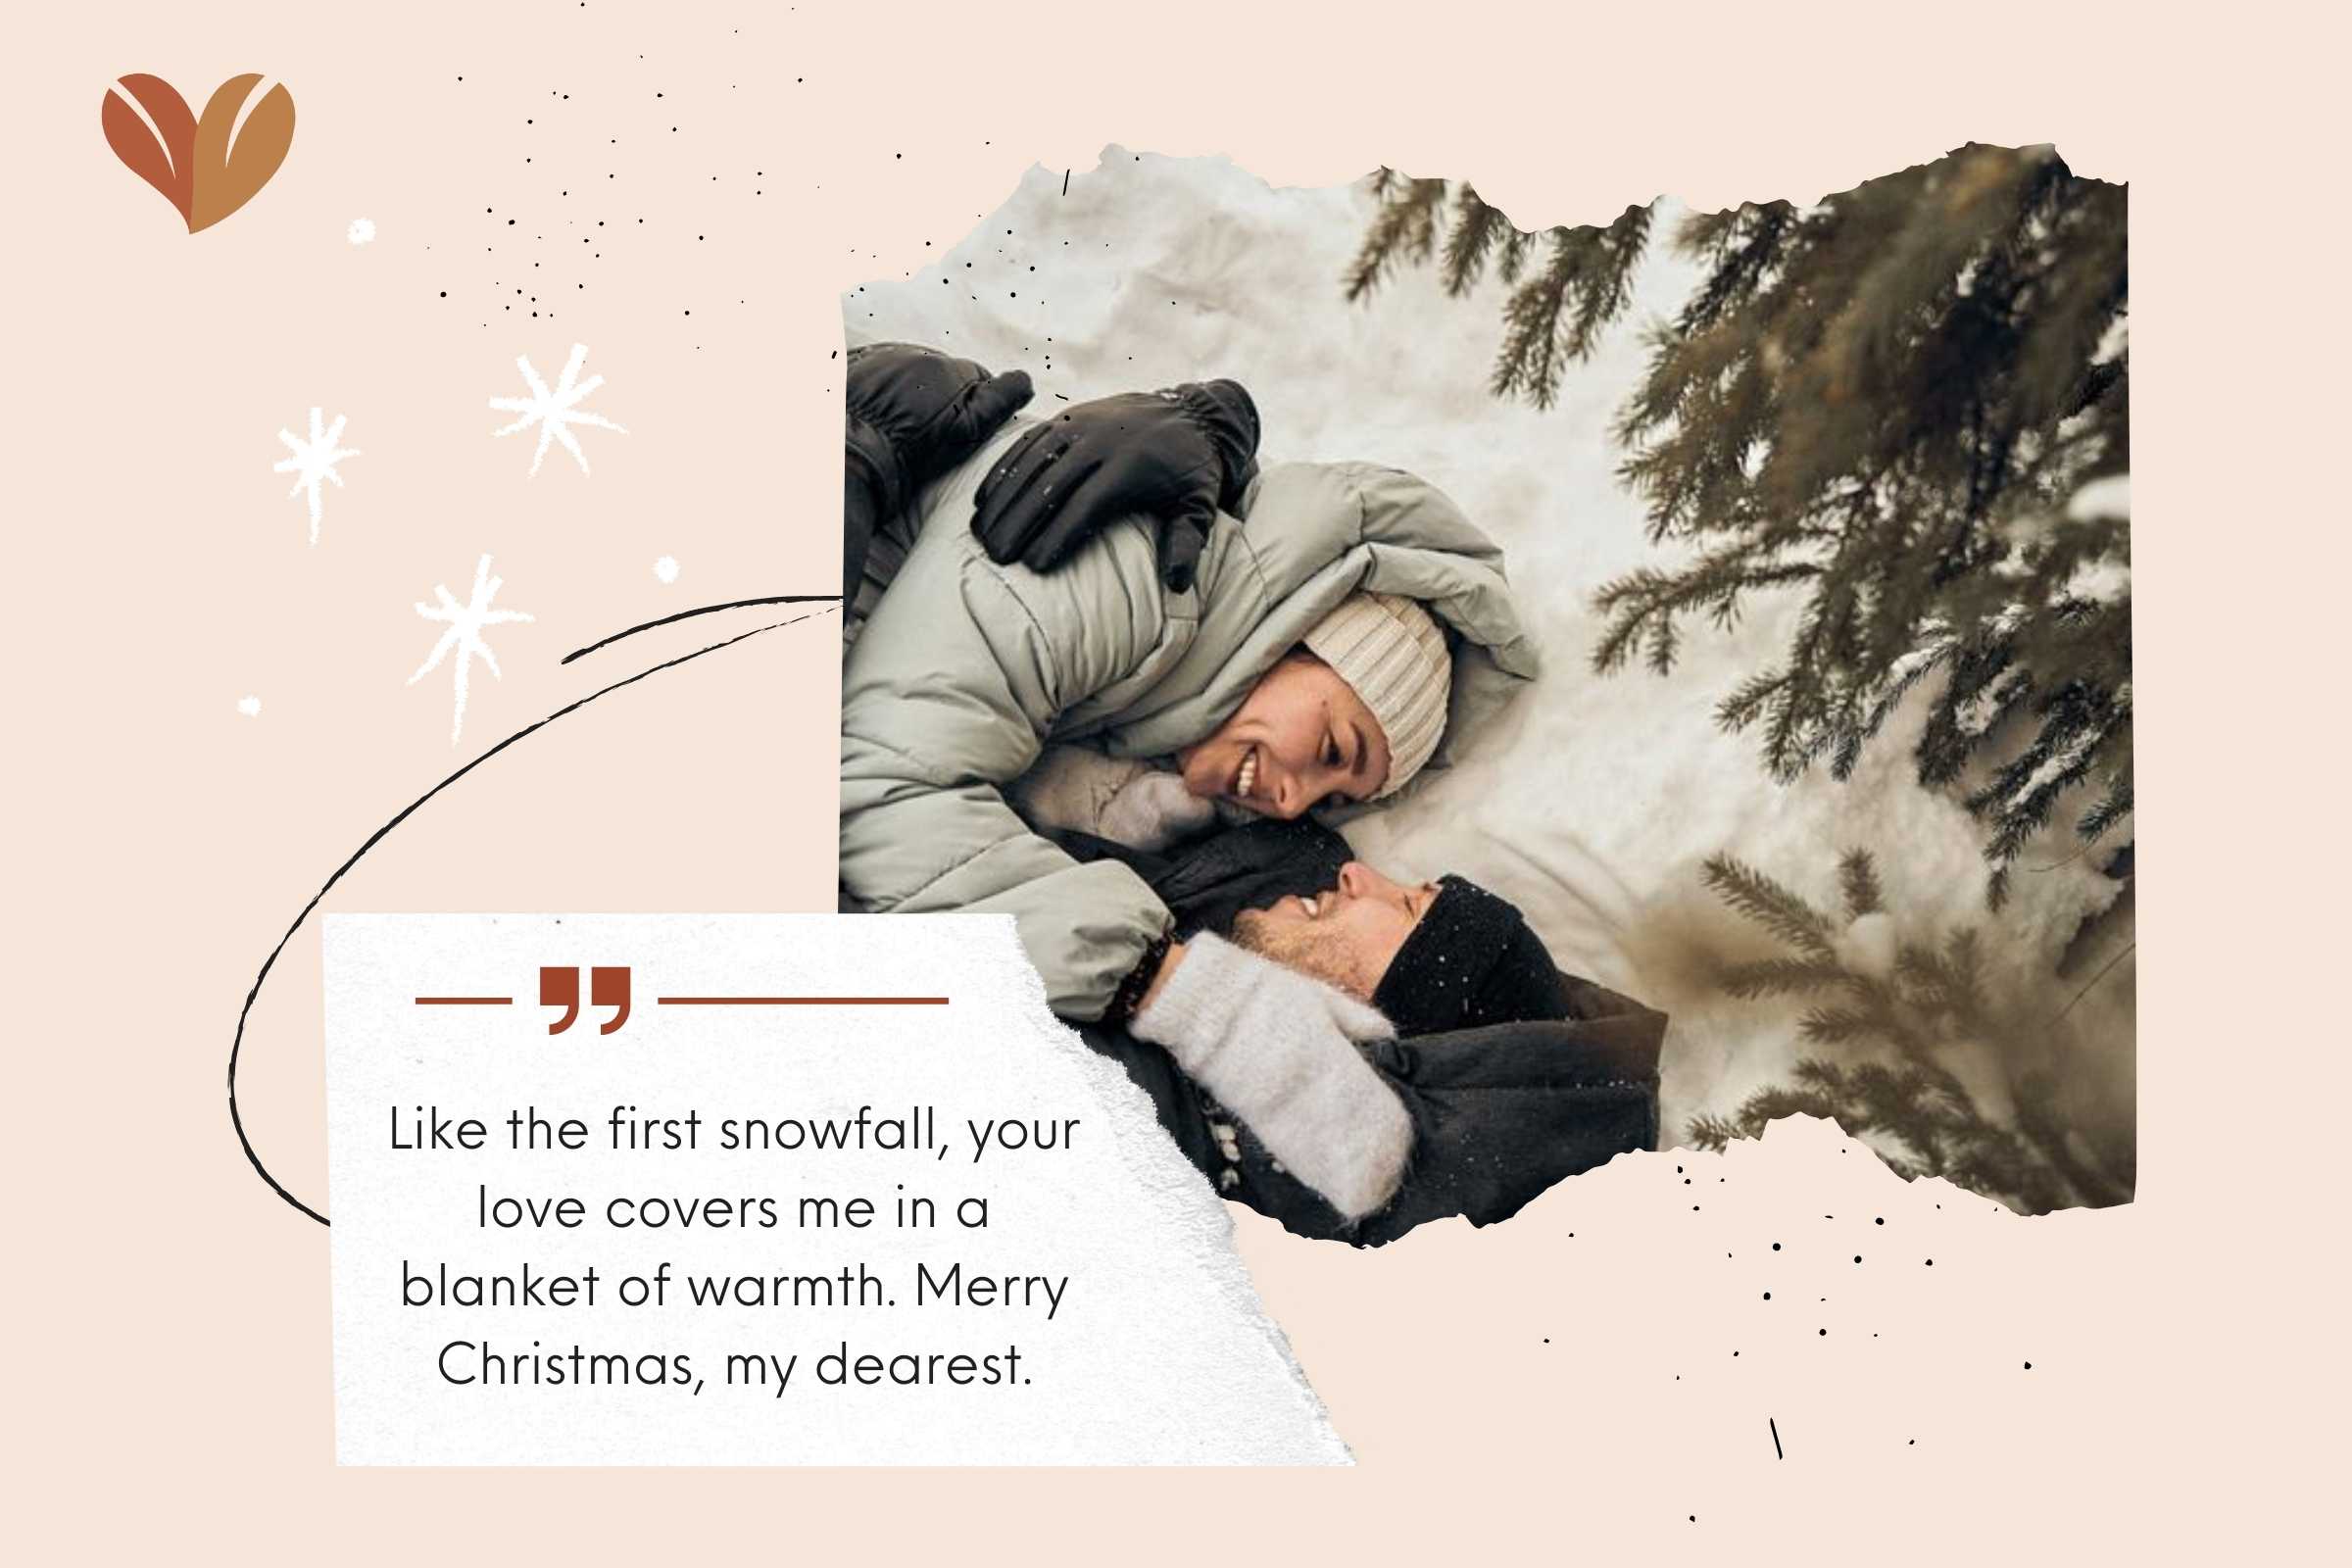 Like the first snowfall, your love covers me in a blanket of warmth. Merry Christmas, my dearest.